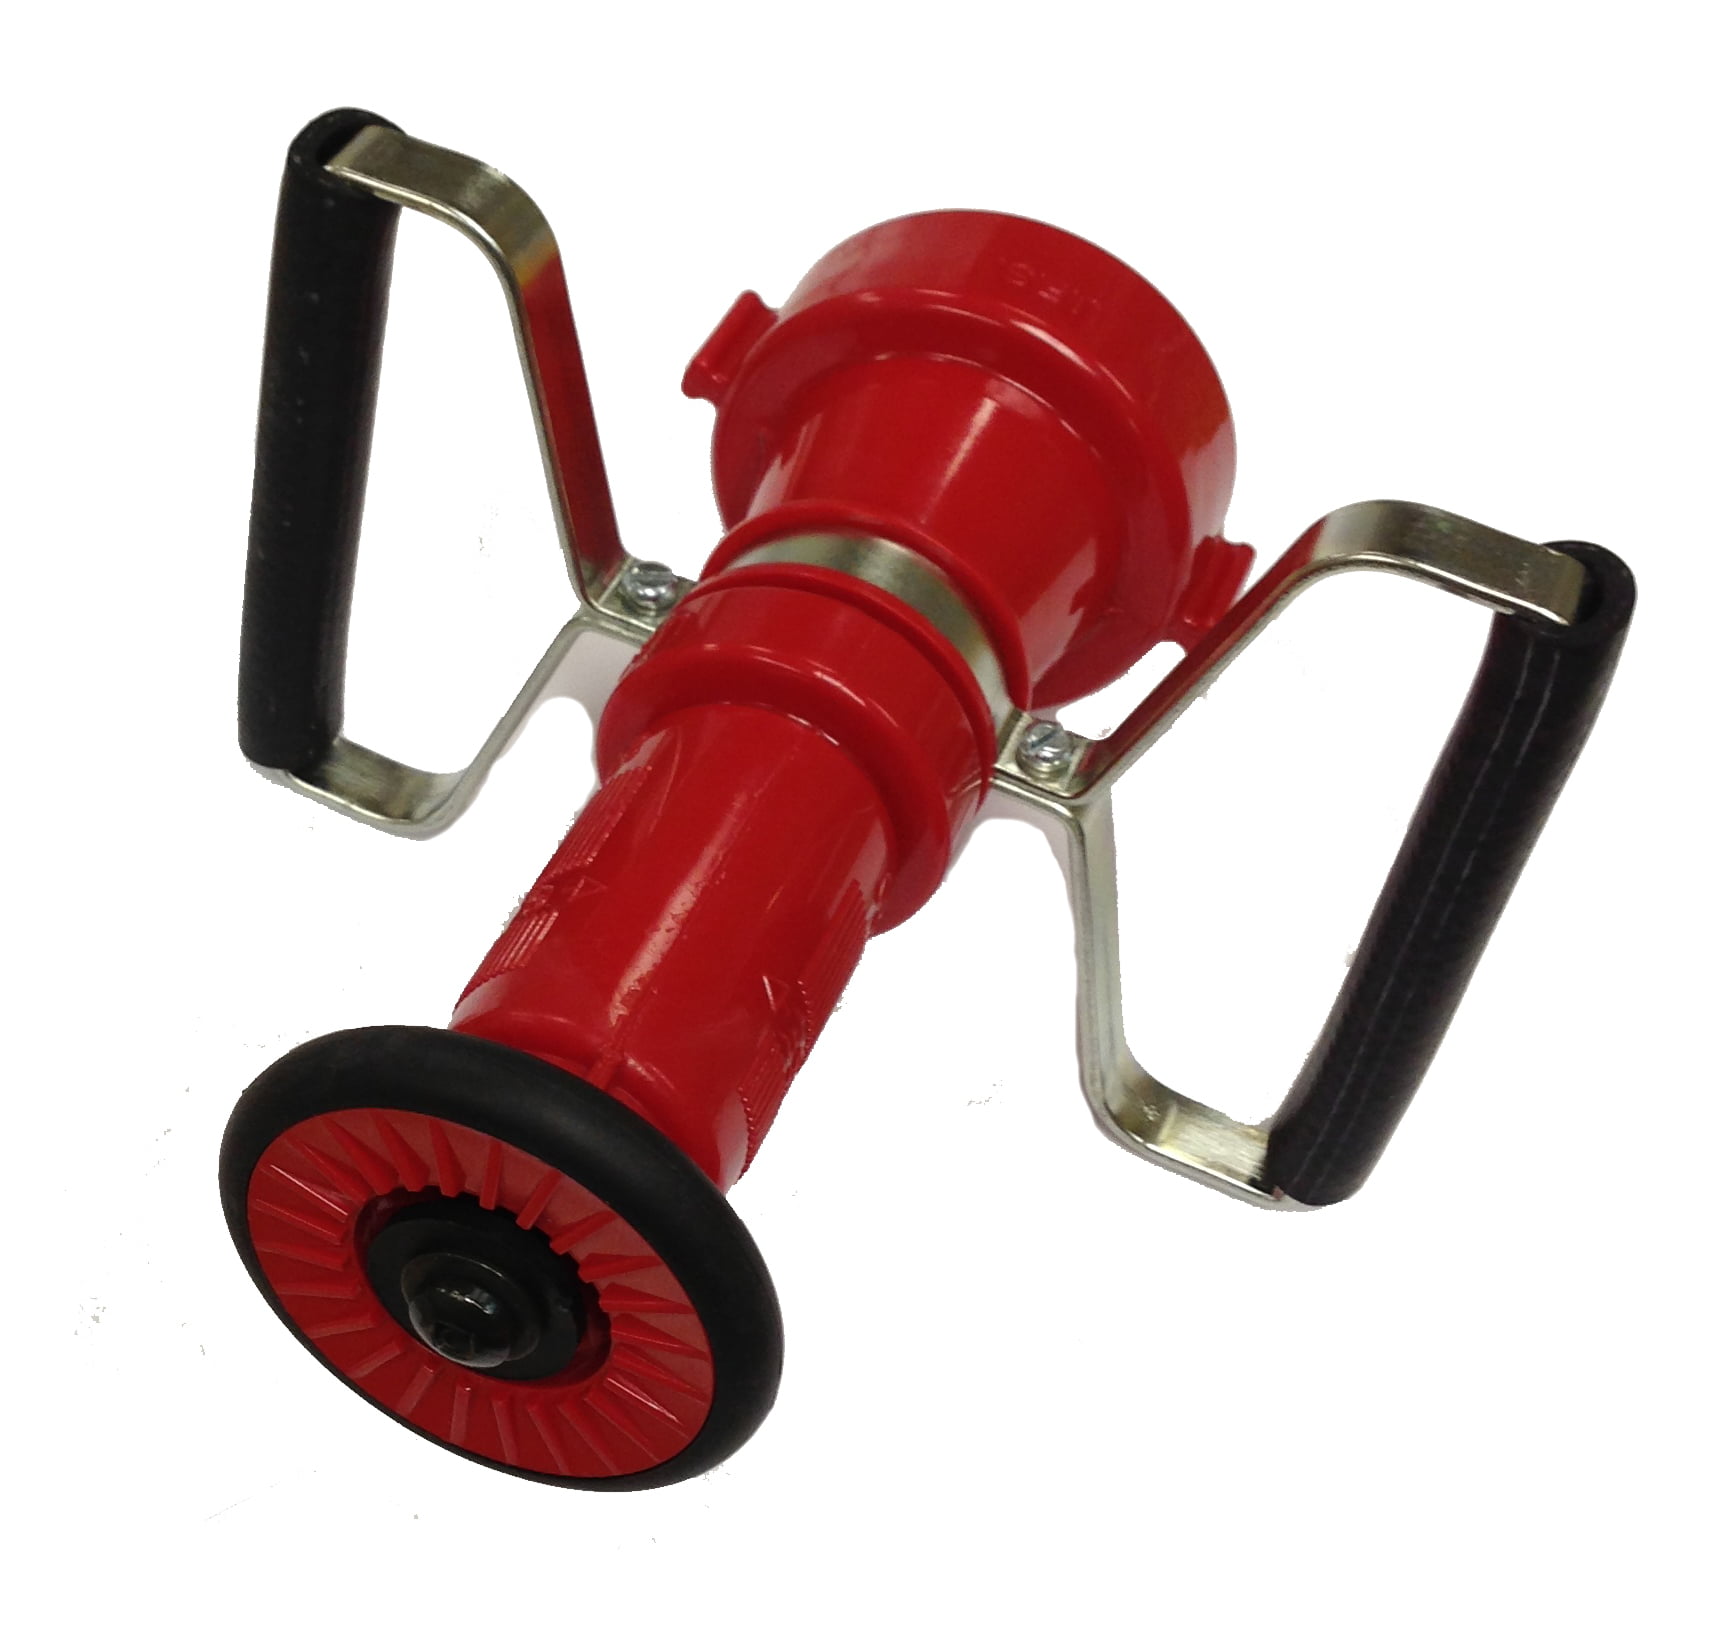 1/2inch Hose Barb Ball Valve Heavy Duty Jet Sweeper Sprayer Hose Nozzle with Hose Clips 